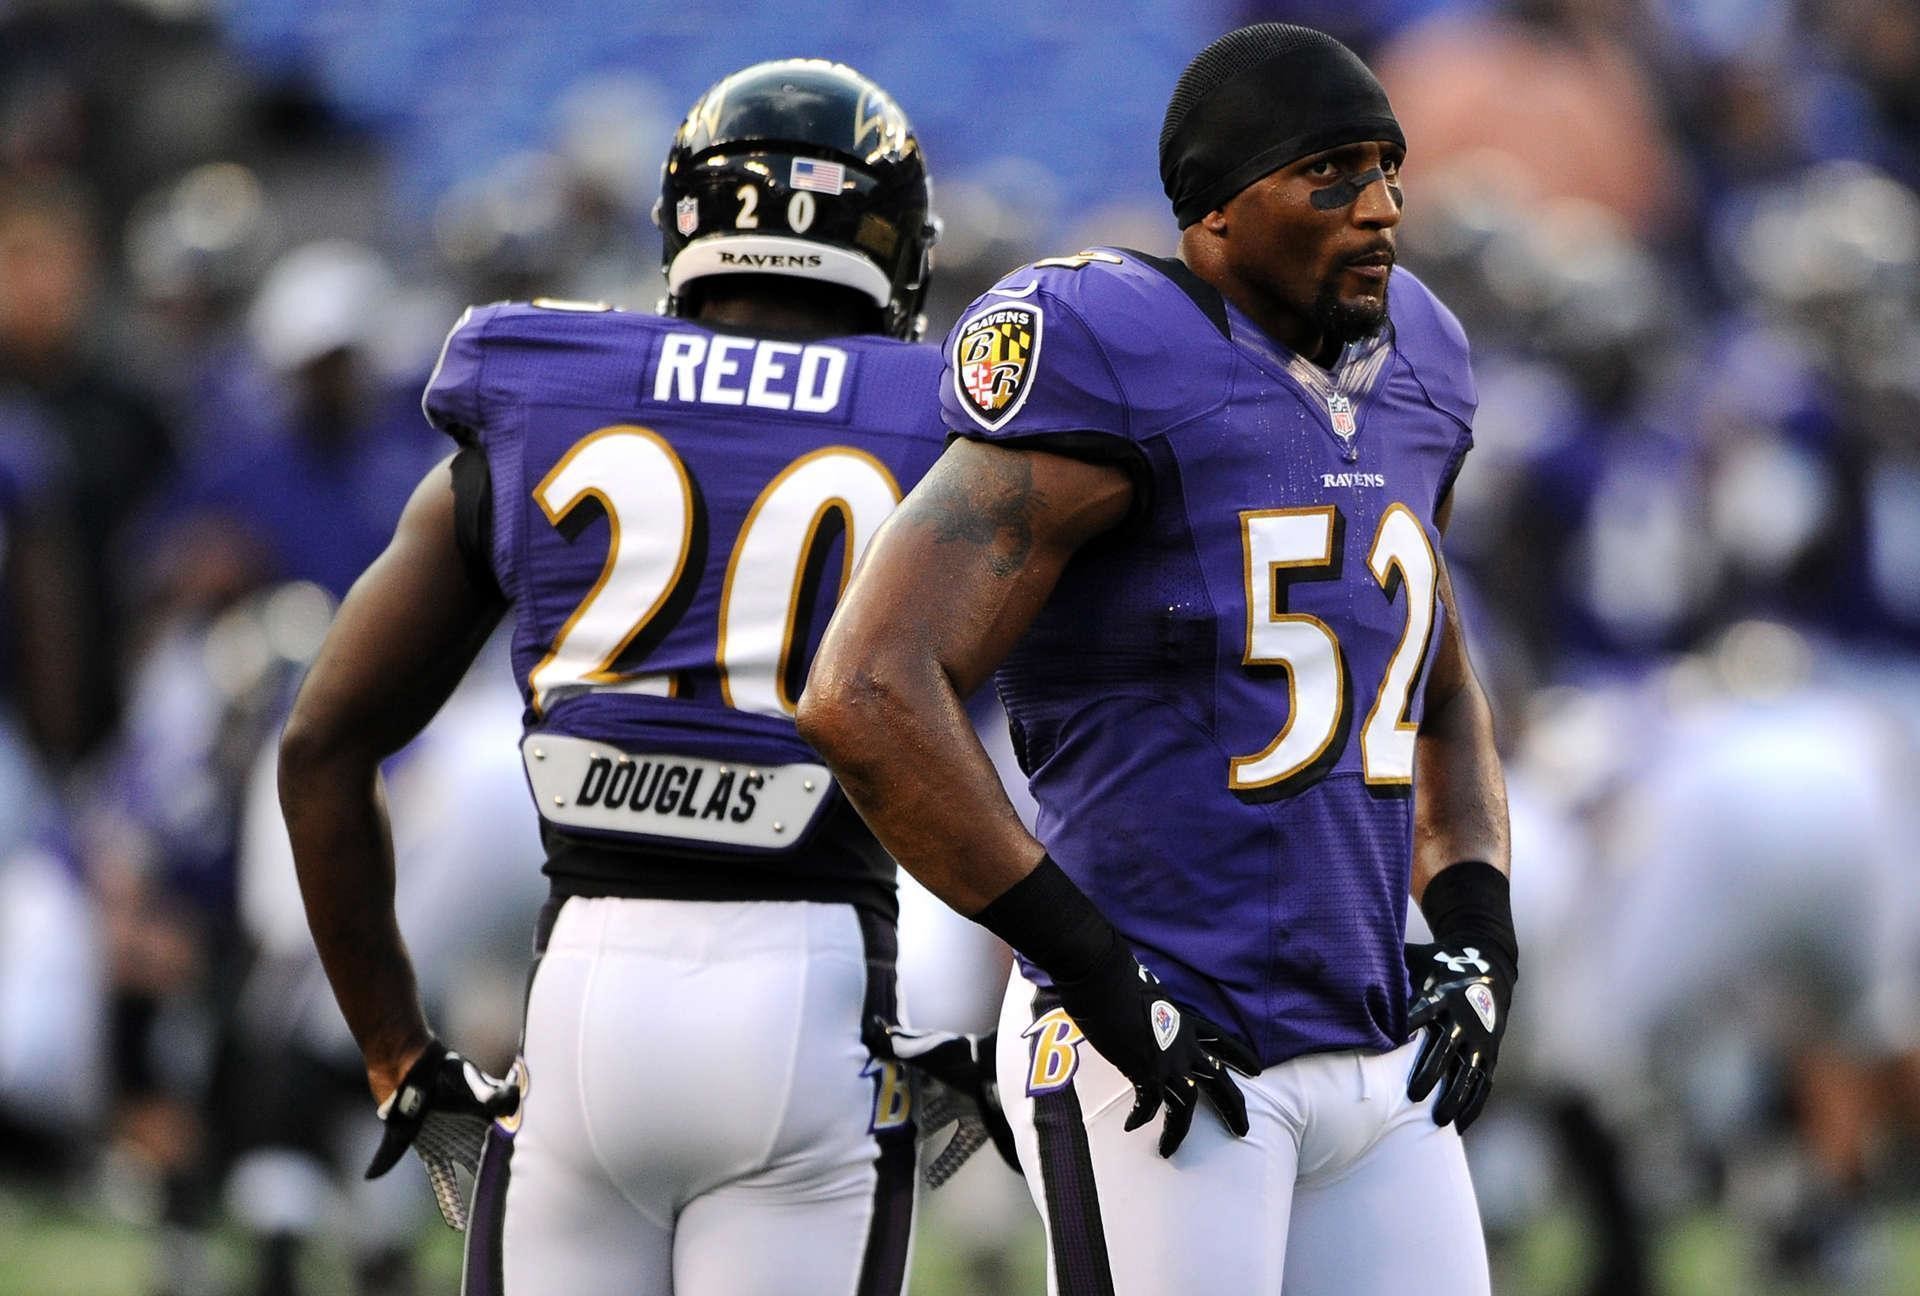 1920x1296 Ed Reed And Ray Lewis | Download High Quality Resolution Wallpapers